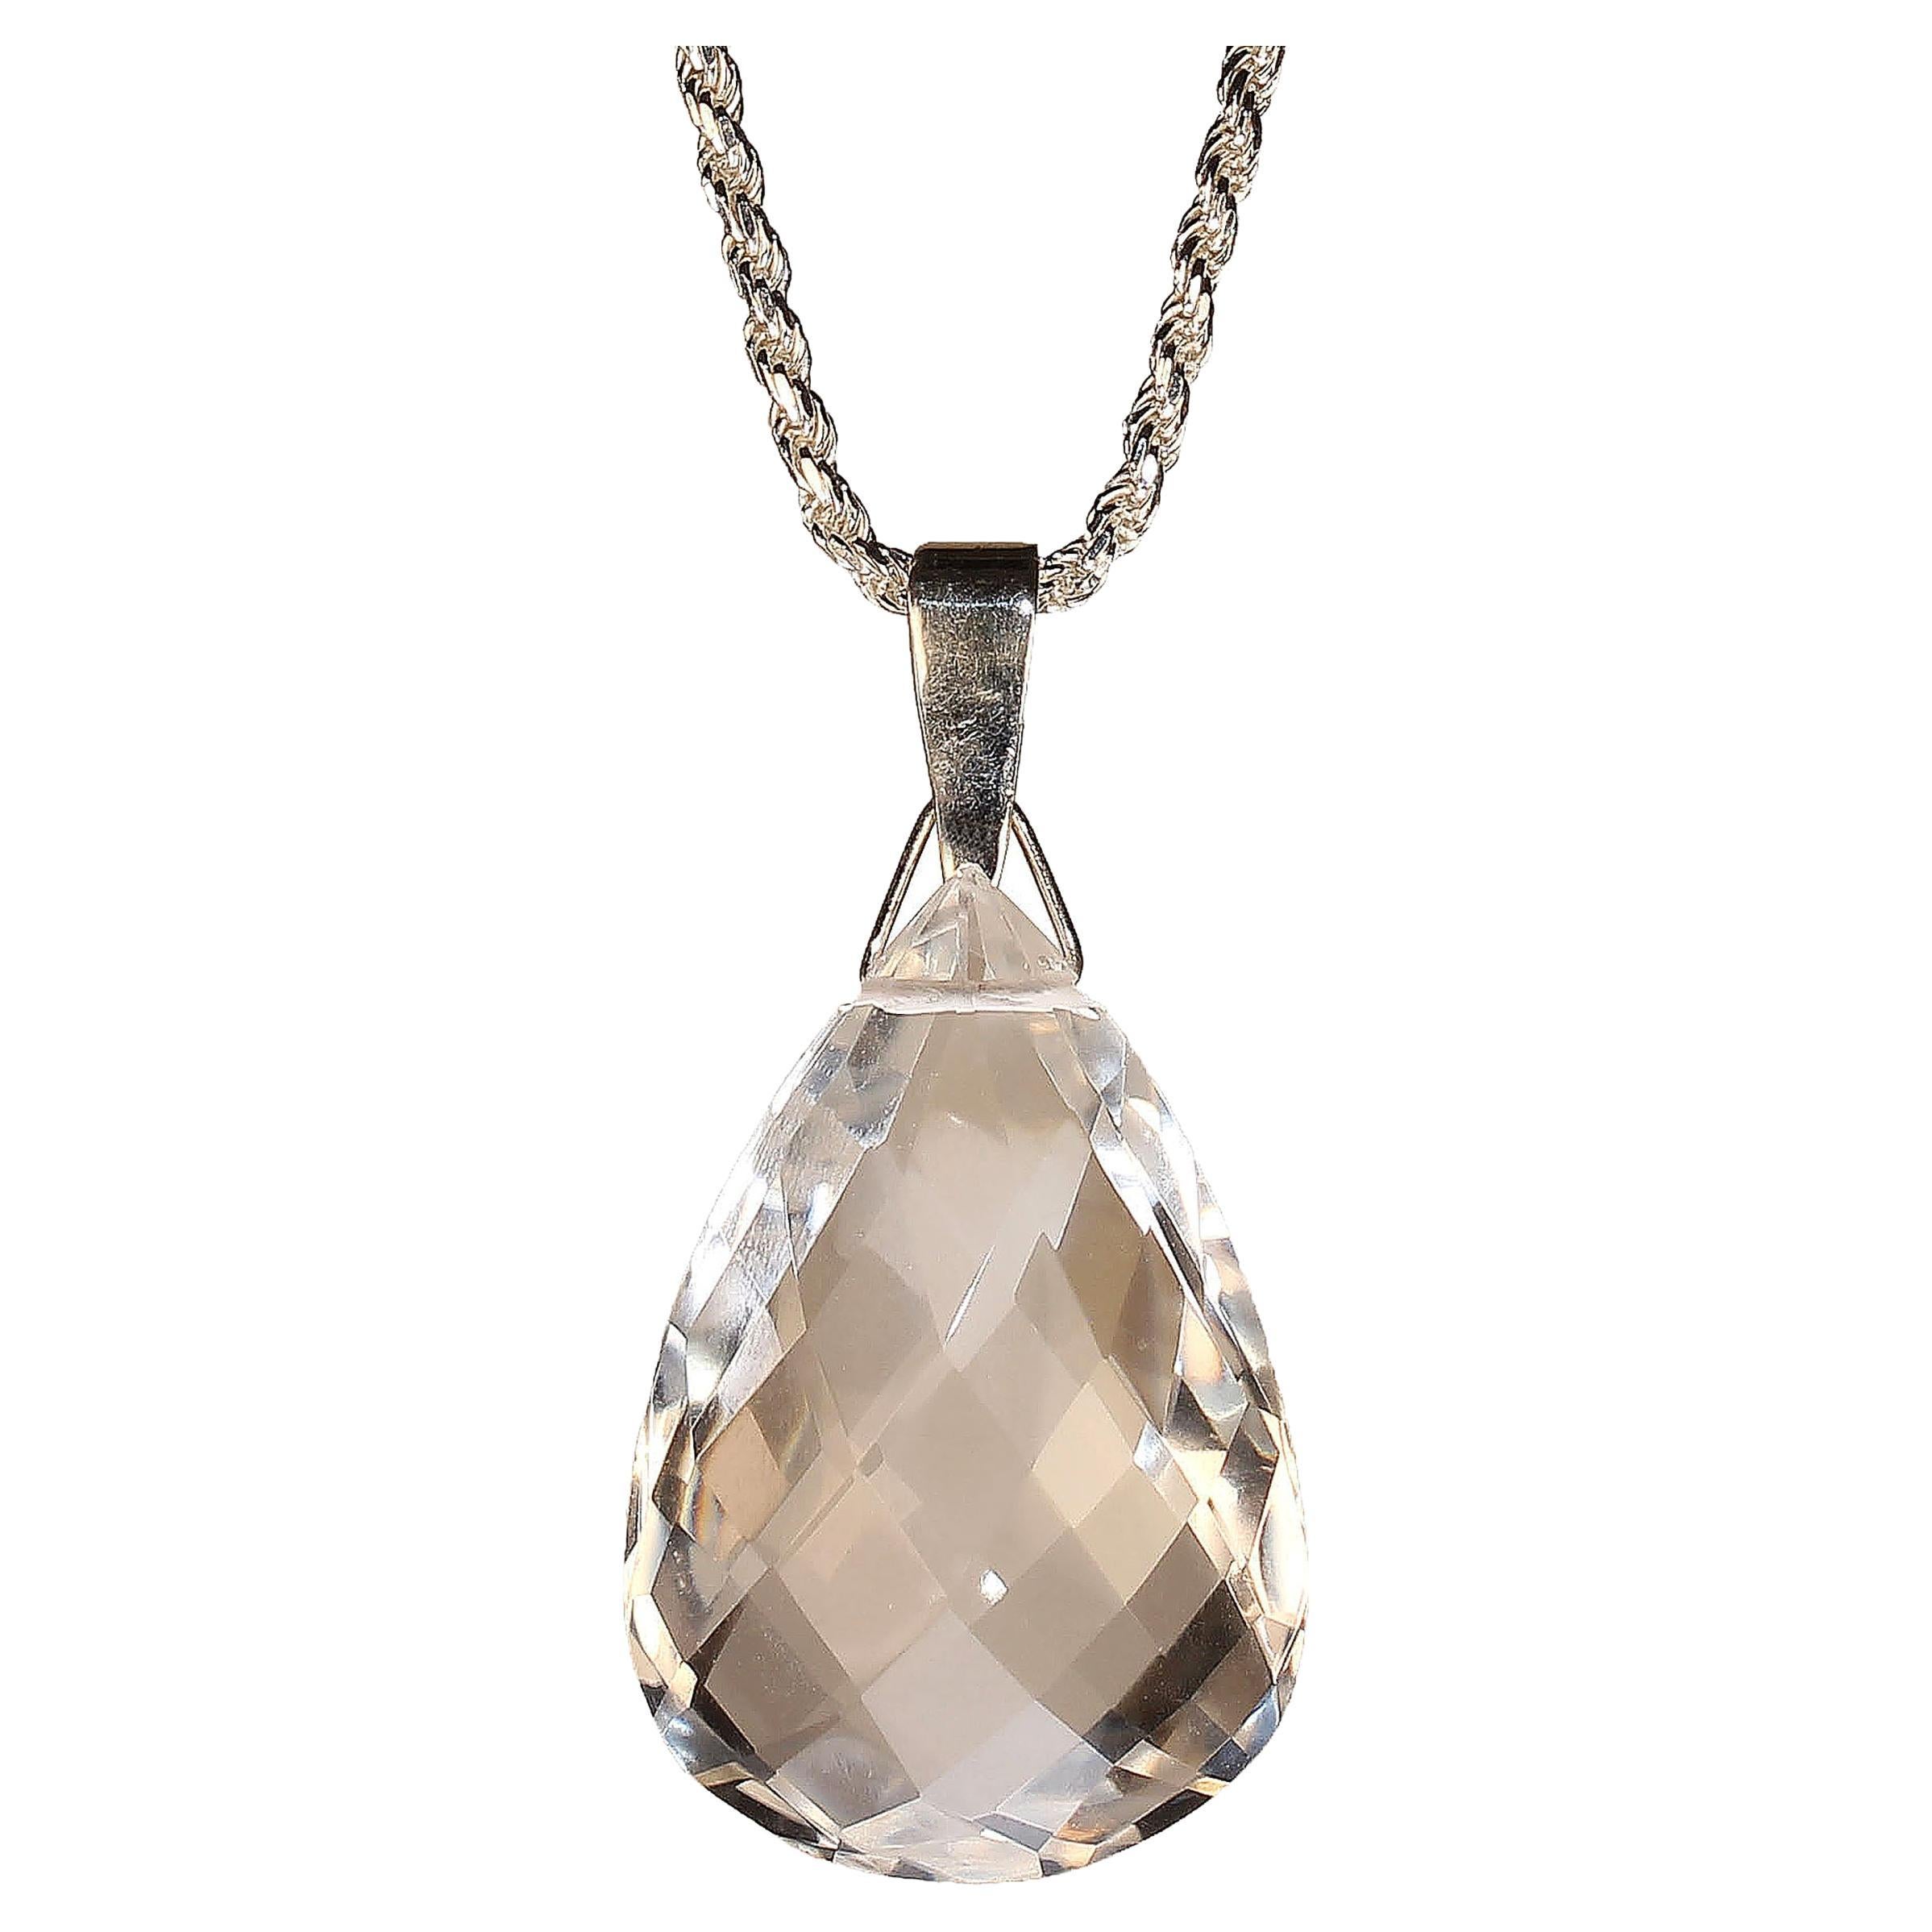 This sparkling fancy cut Quartz Crystal and Sterling Silver pendant is just what you need for summer. This gorgeous quartz crystal is supposed to be an amplifying stone which means that whatever you put into it, it will return many times. Think of